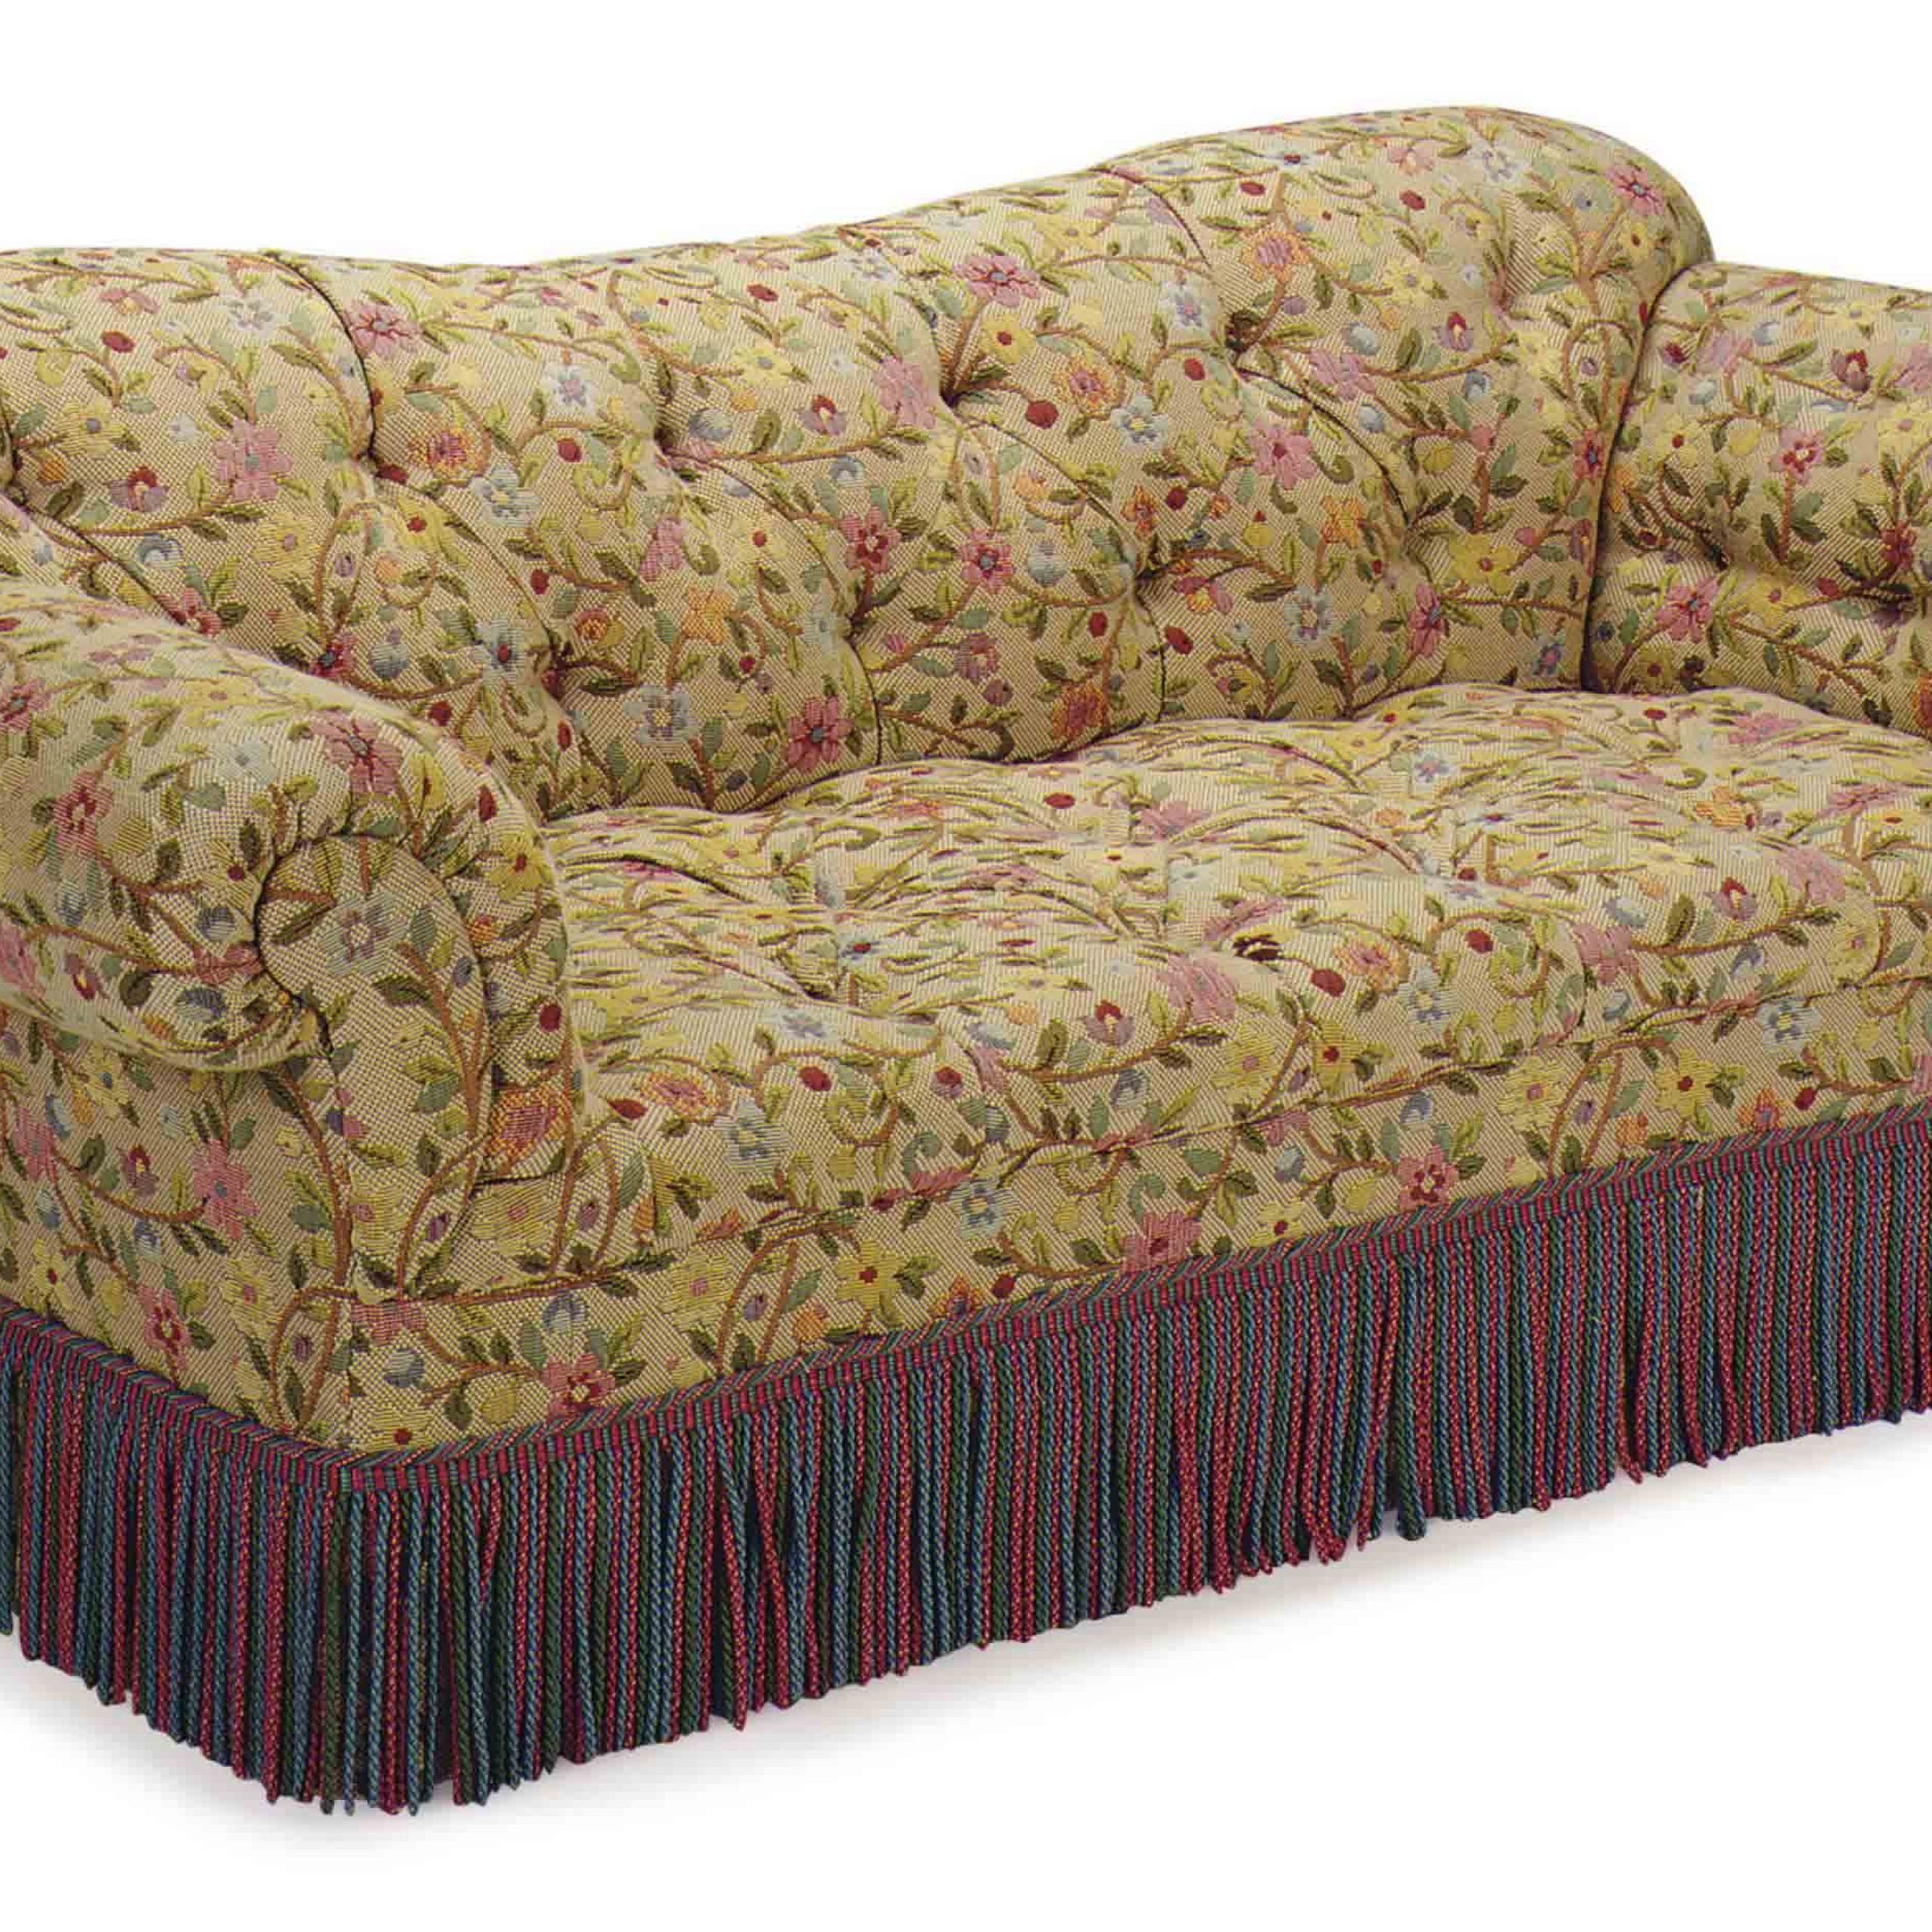 A Button Tufted Floral Pattern Upholstered Sofa, , Late 20th Century Regarding Sofas In Pattern (View 15 of 20)